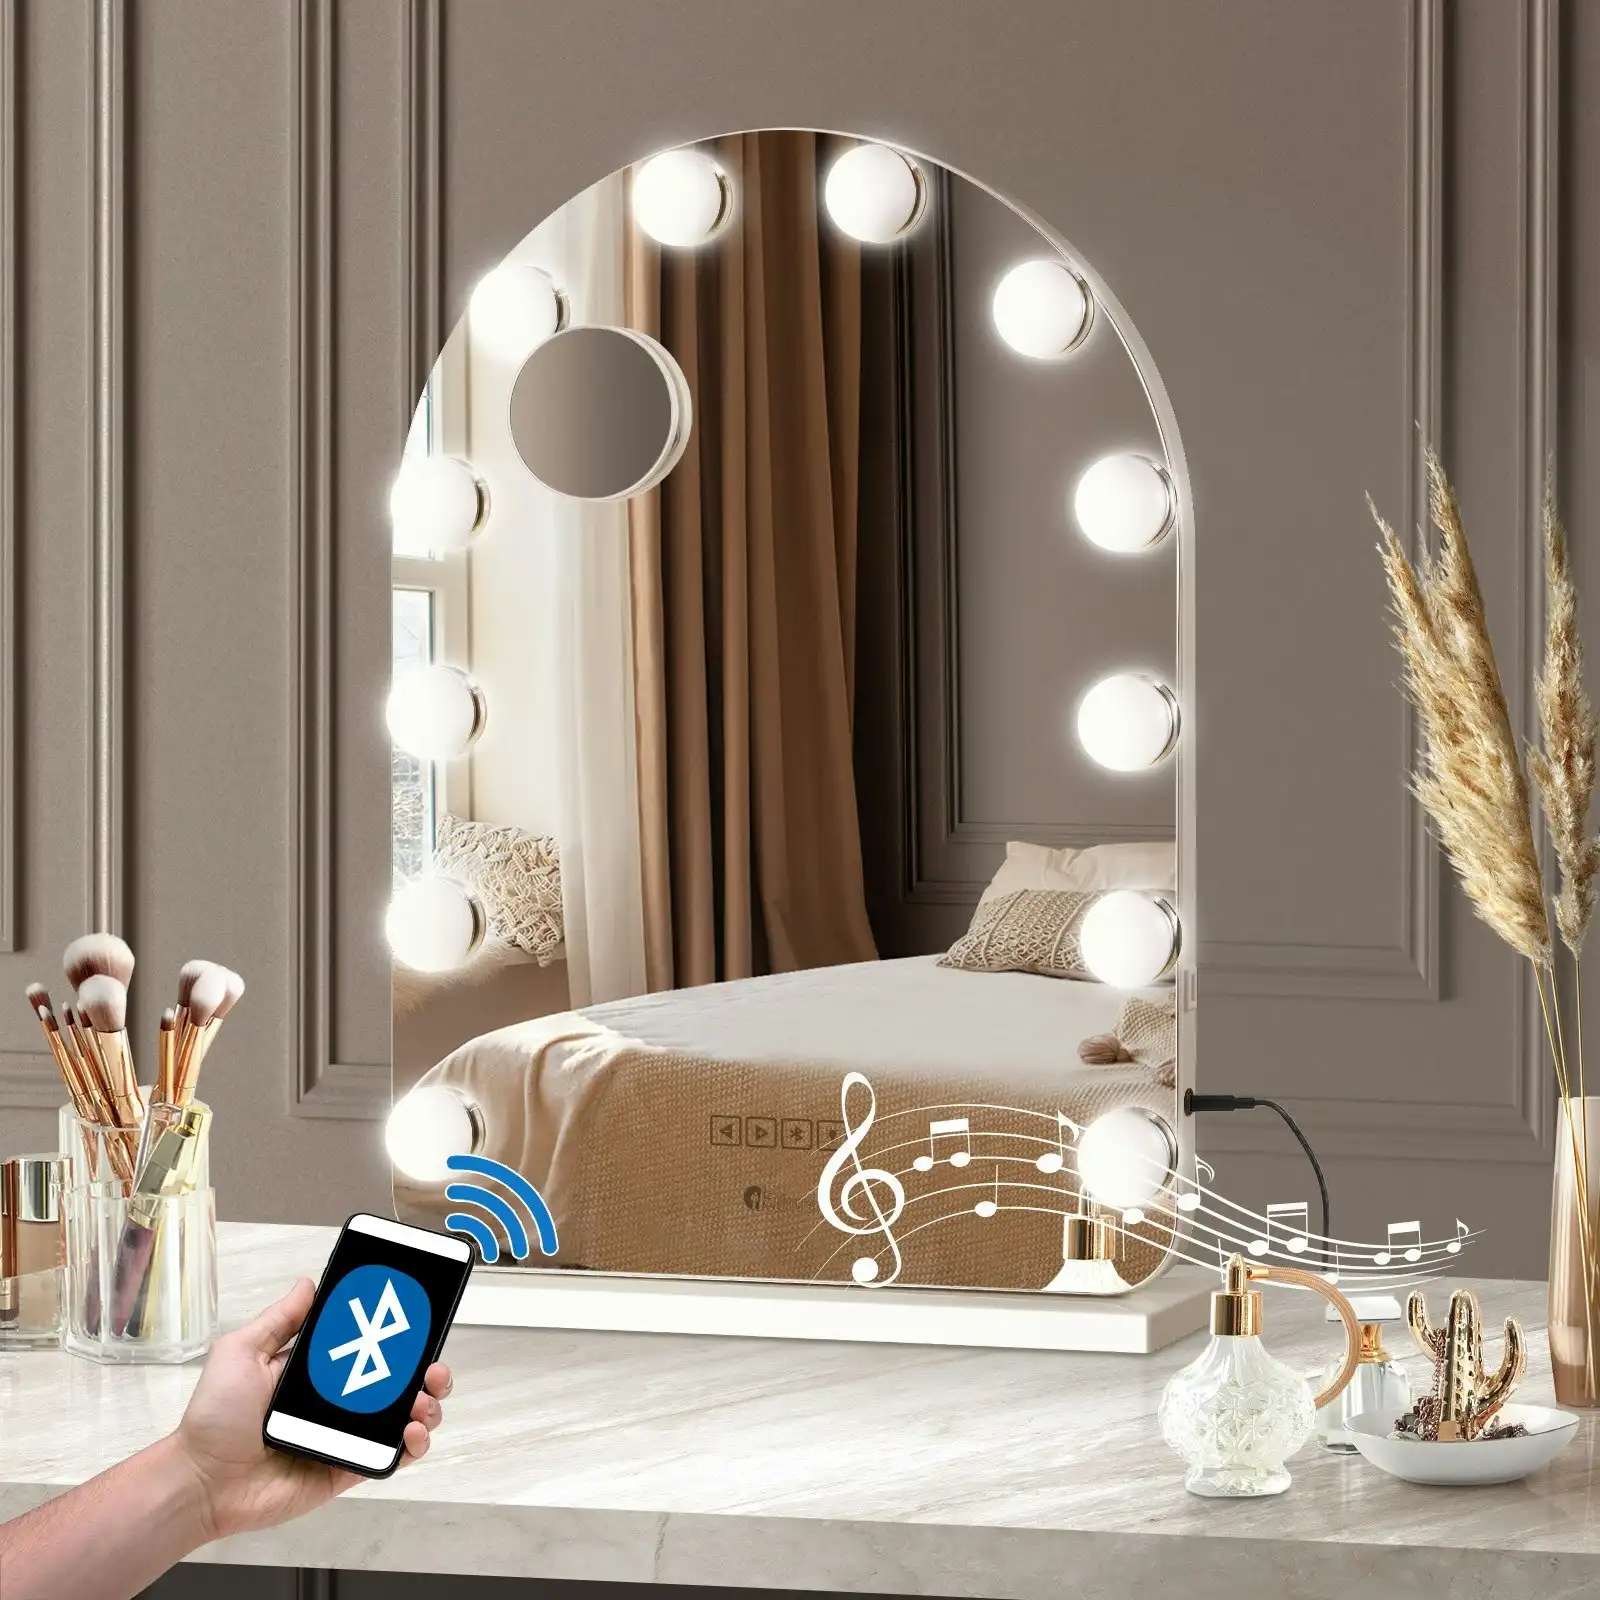 Oikiture 61x43cm LED Arched Makeup Mirror Bluetooth Hollywood Vanity Wall Mirrors Standing Wall Mounted